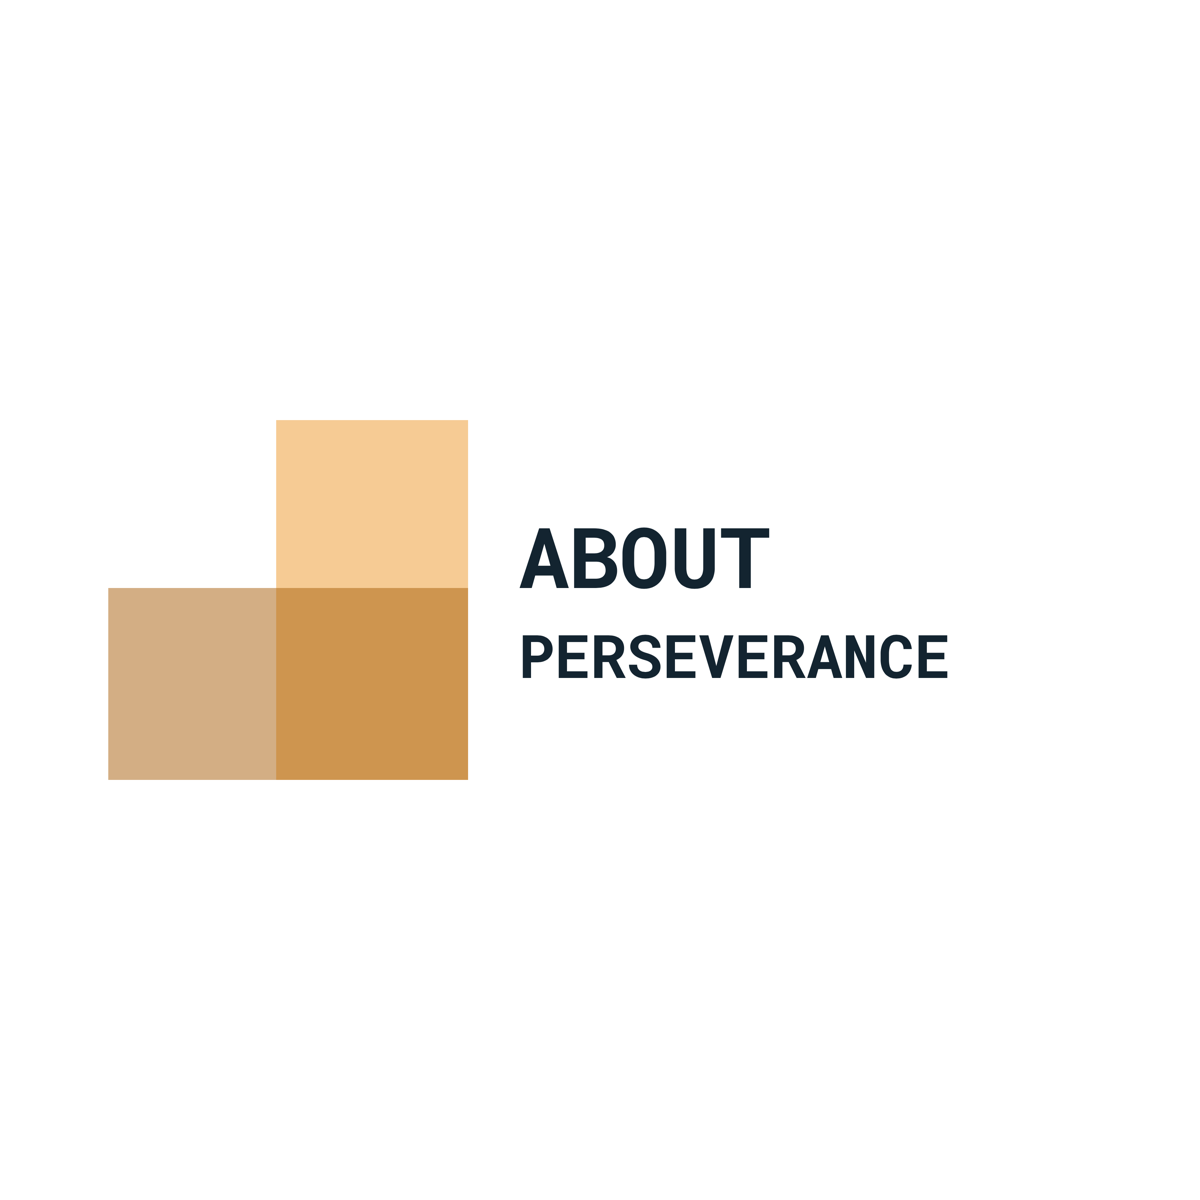 The About Perseverance Foundation logo